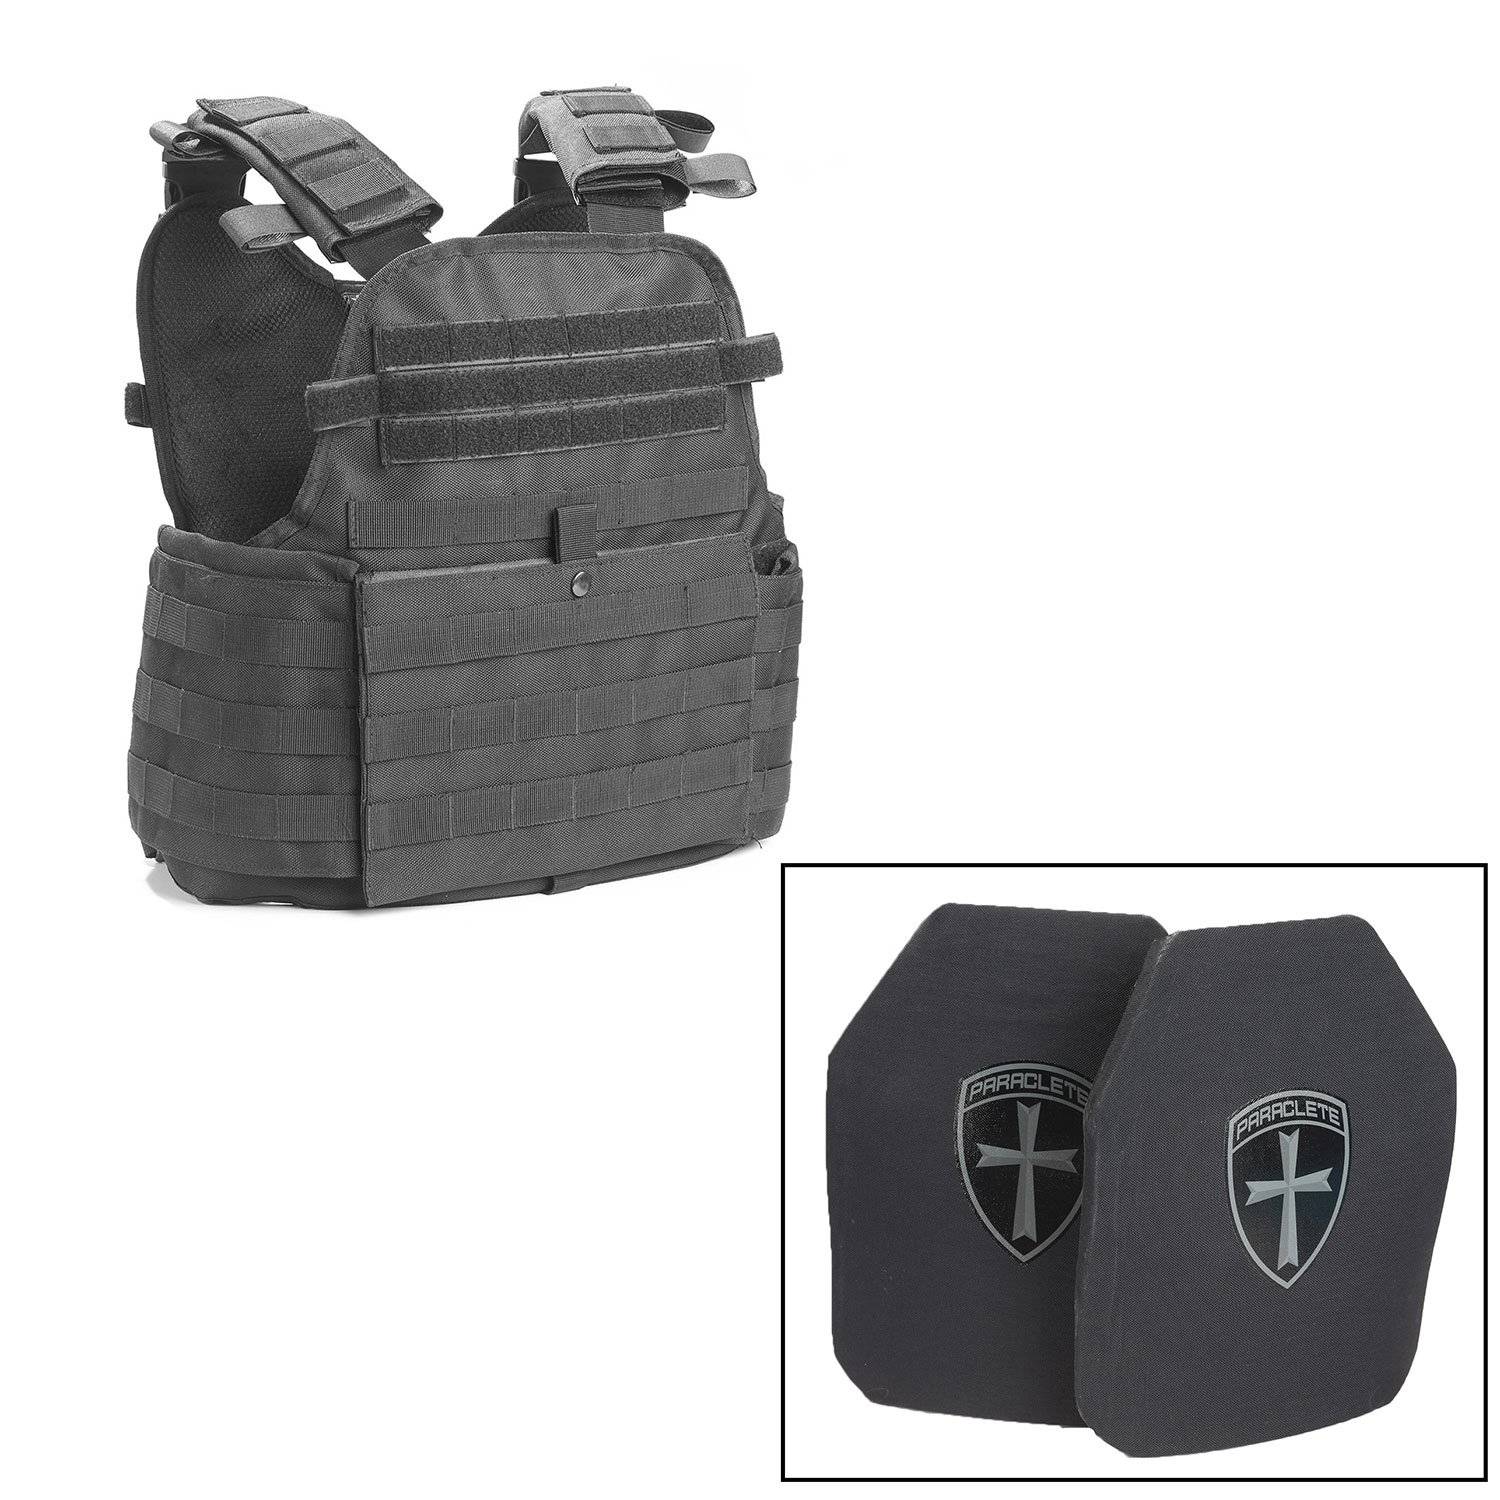 Galls Active Shooter Body Armor Kit